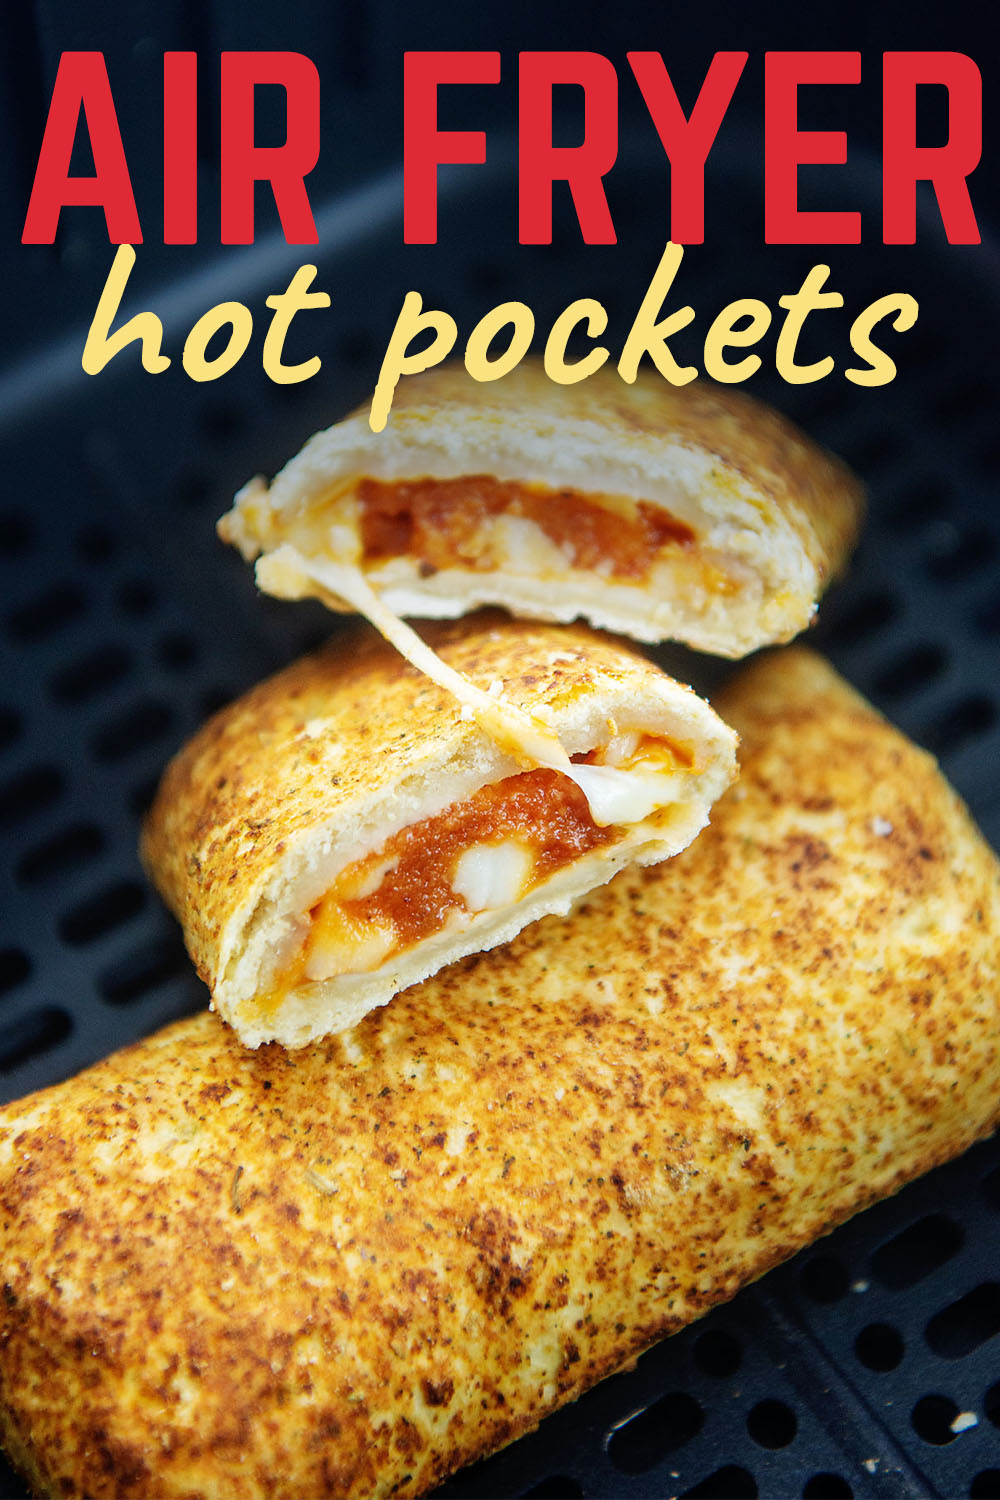 The air fryer is the perfect kitchen appliance for making hot pockets taste better than ever!